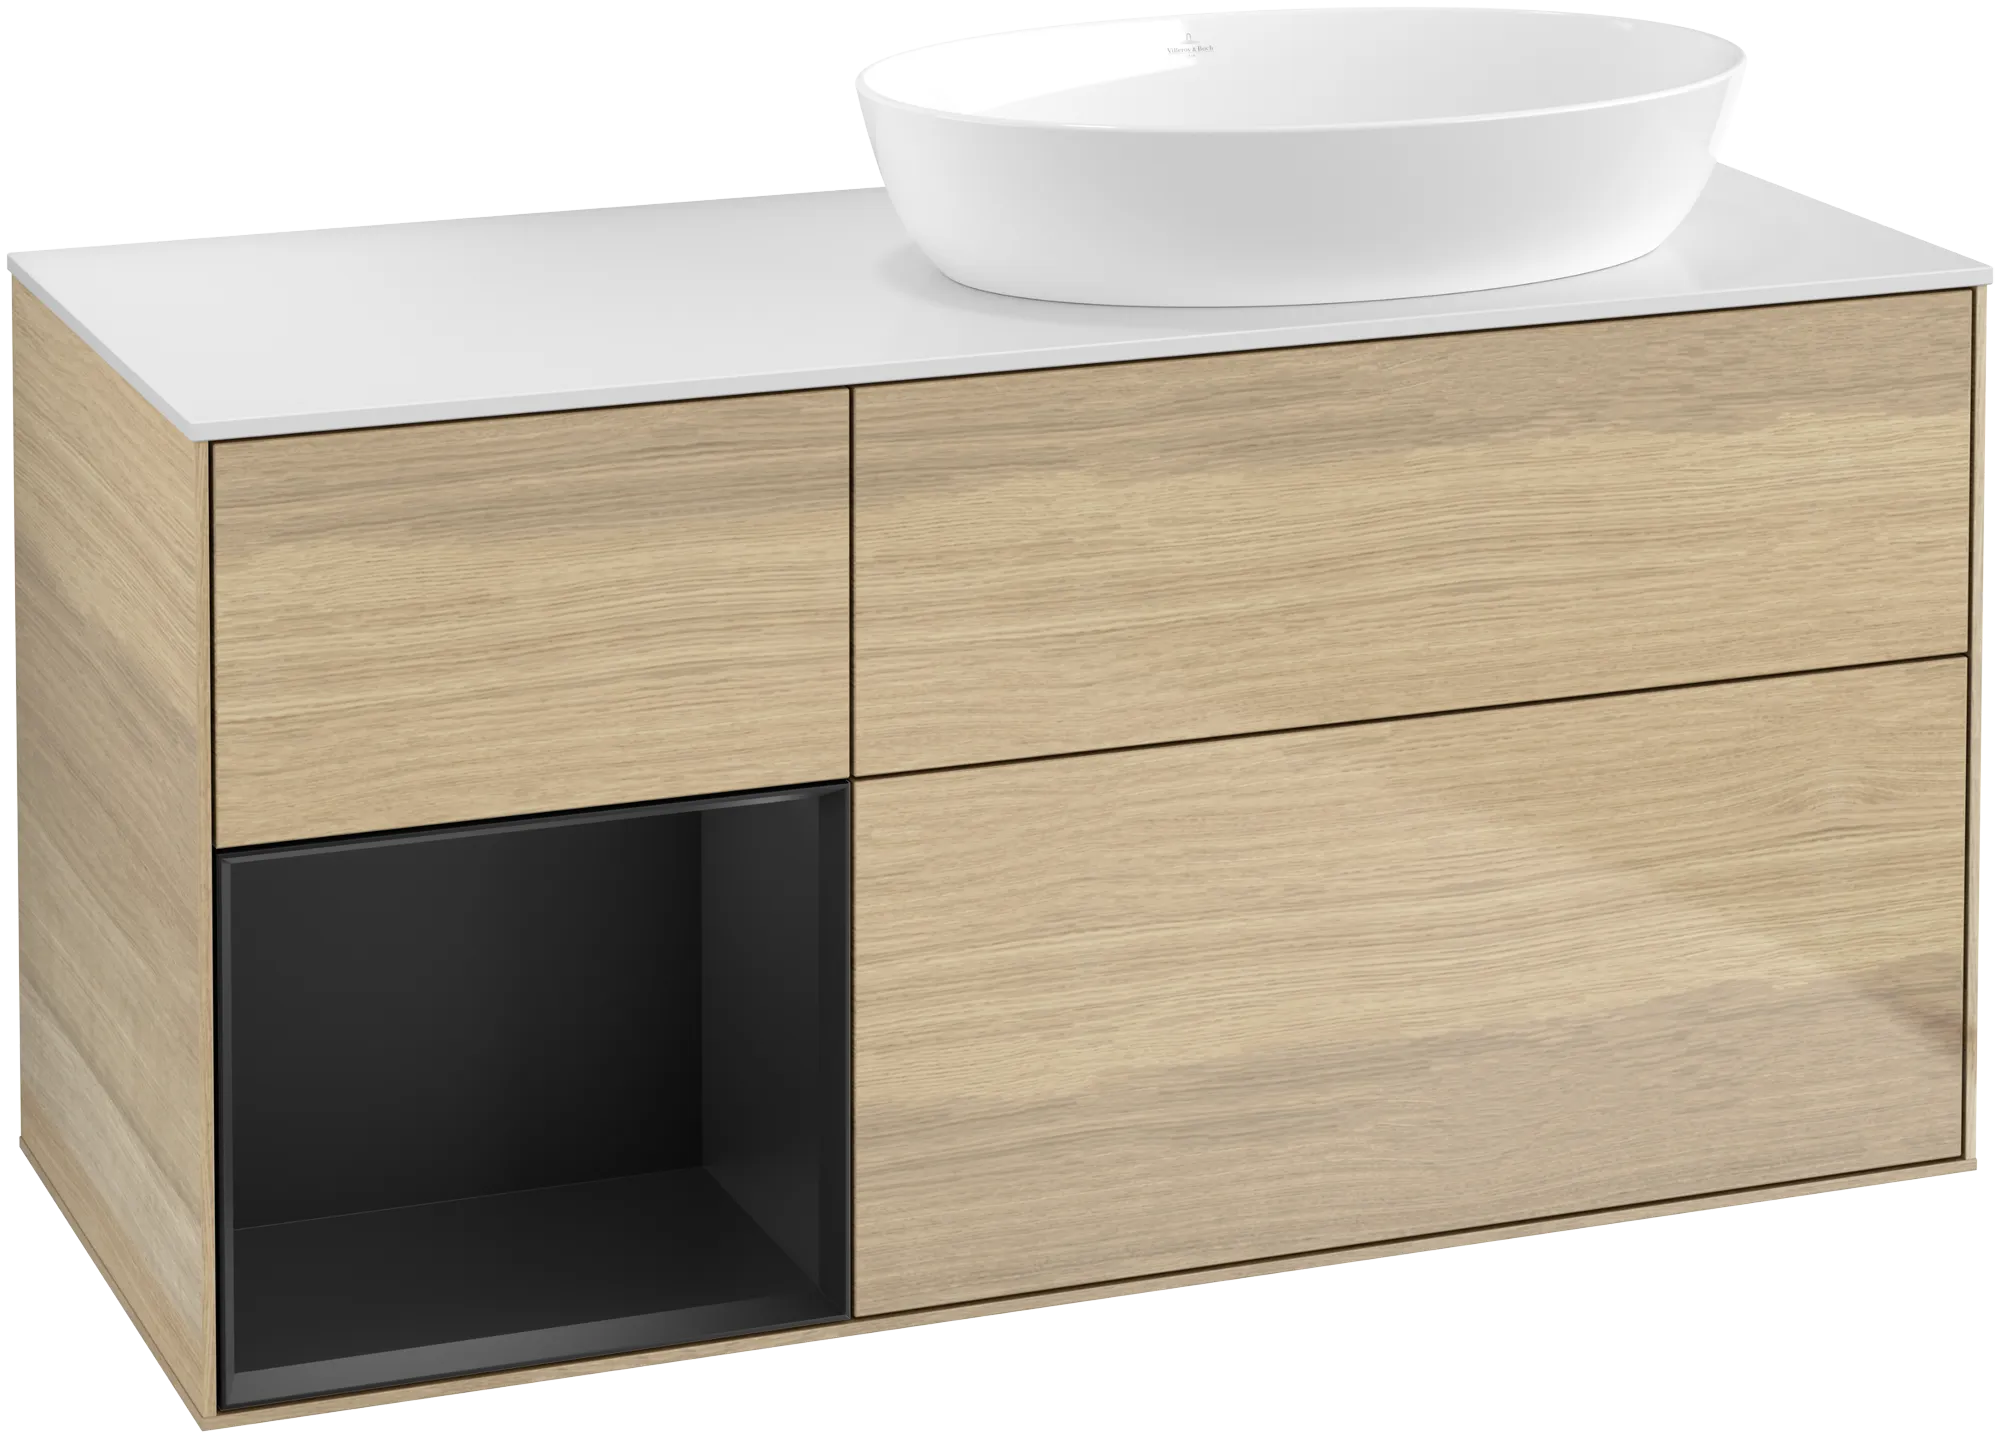 Picture of VILLEROY BOCH Finion Vanity unit, with lighting, 3 pull-out compartments, 1200 x 603 x 501 mm, Oak Veneer / Black Matt Lacquer / Glass White Matt #GA41PDPC